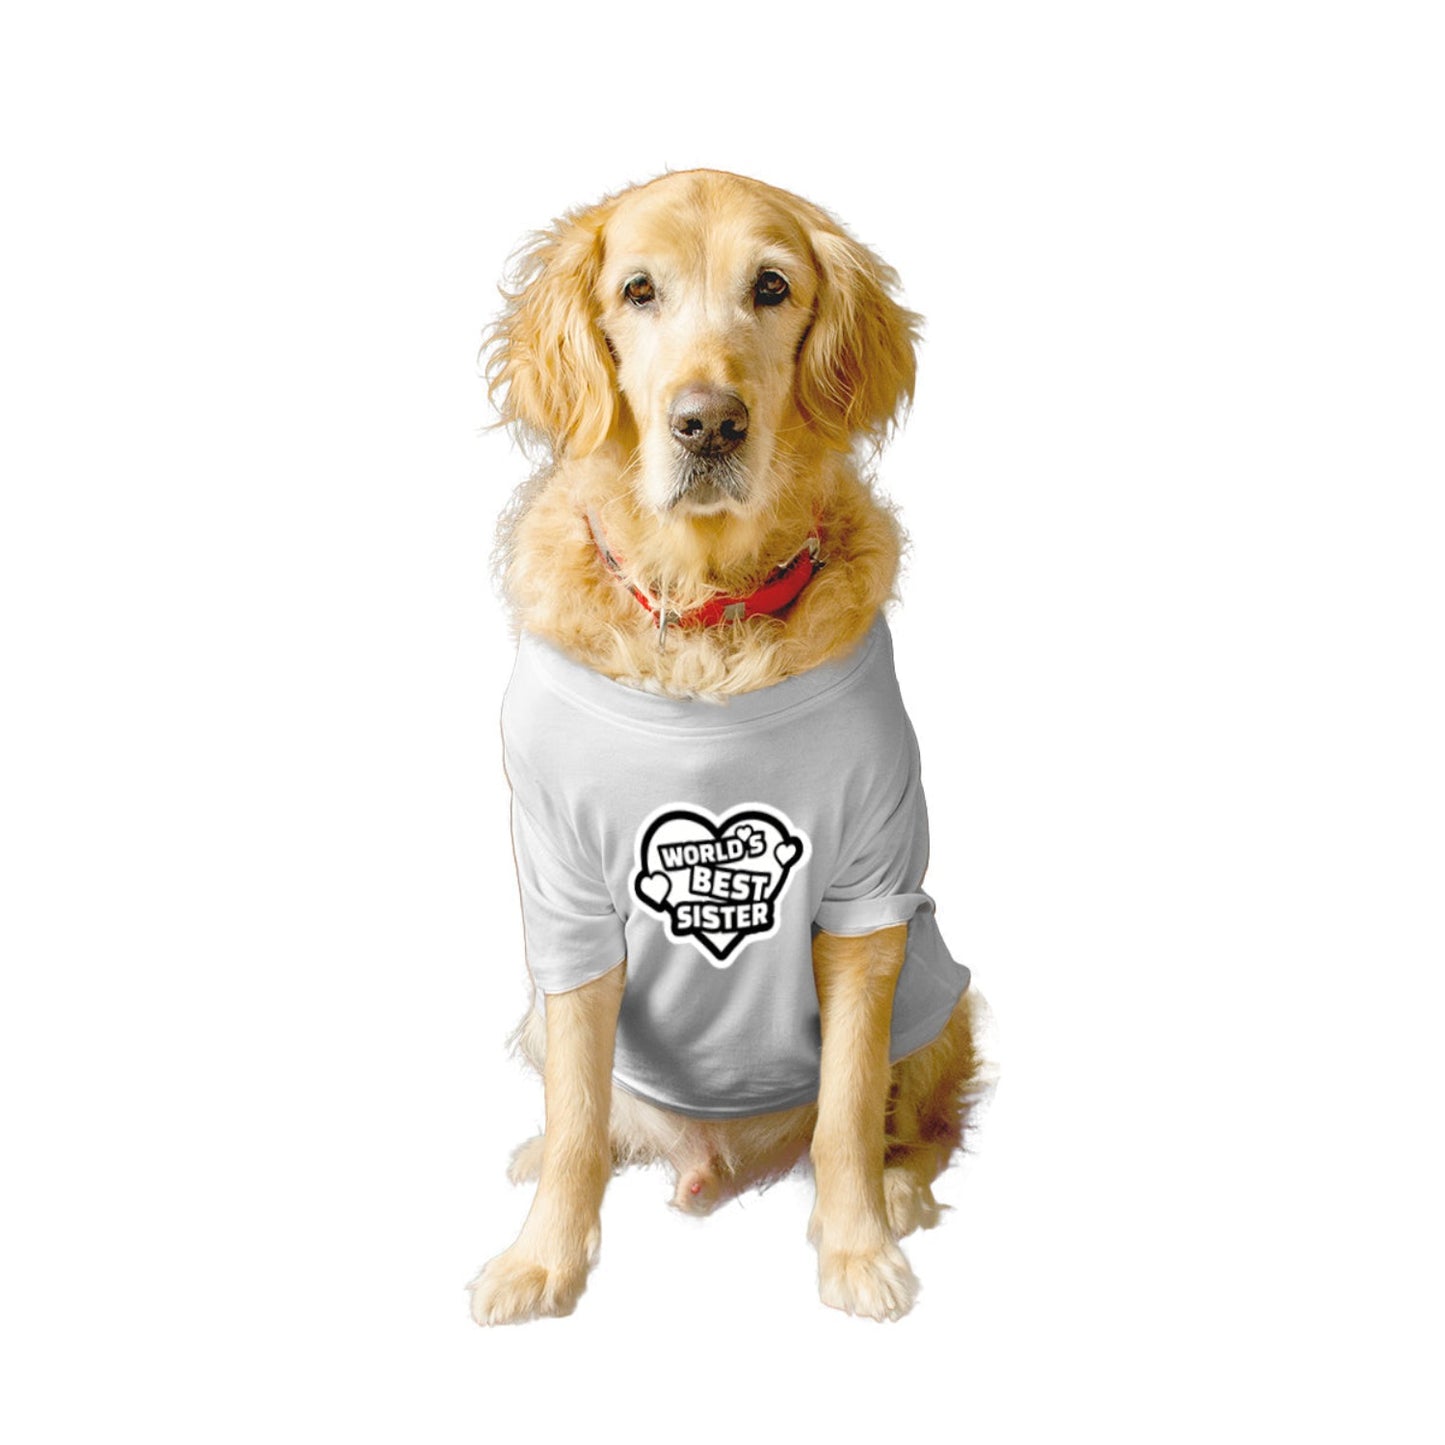 Ruse XX-Small (Chihuahuas, Papillons) / White Ruse Basic Crew Neck "World's Best Sister" Printed Half Sleeves Dog Tee